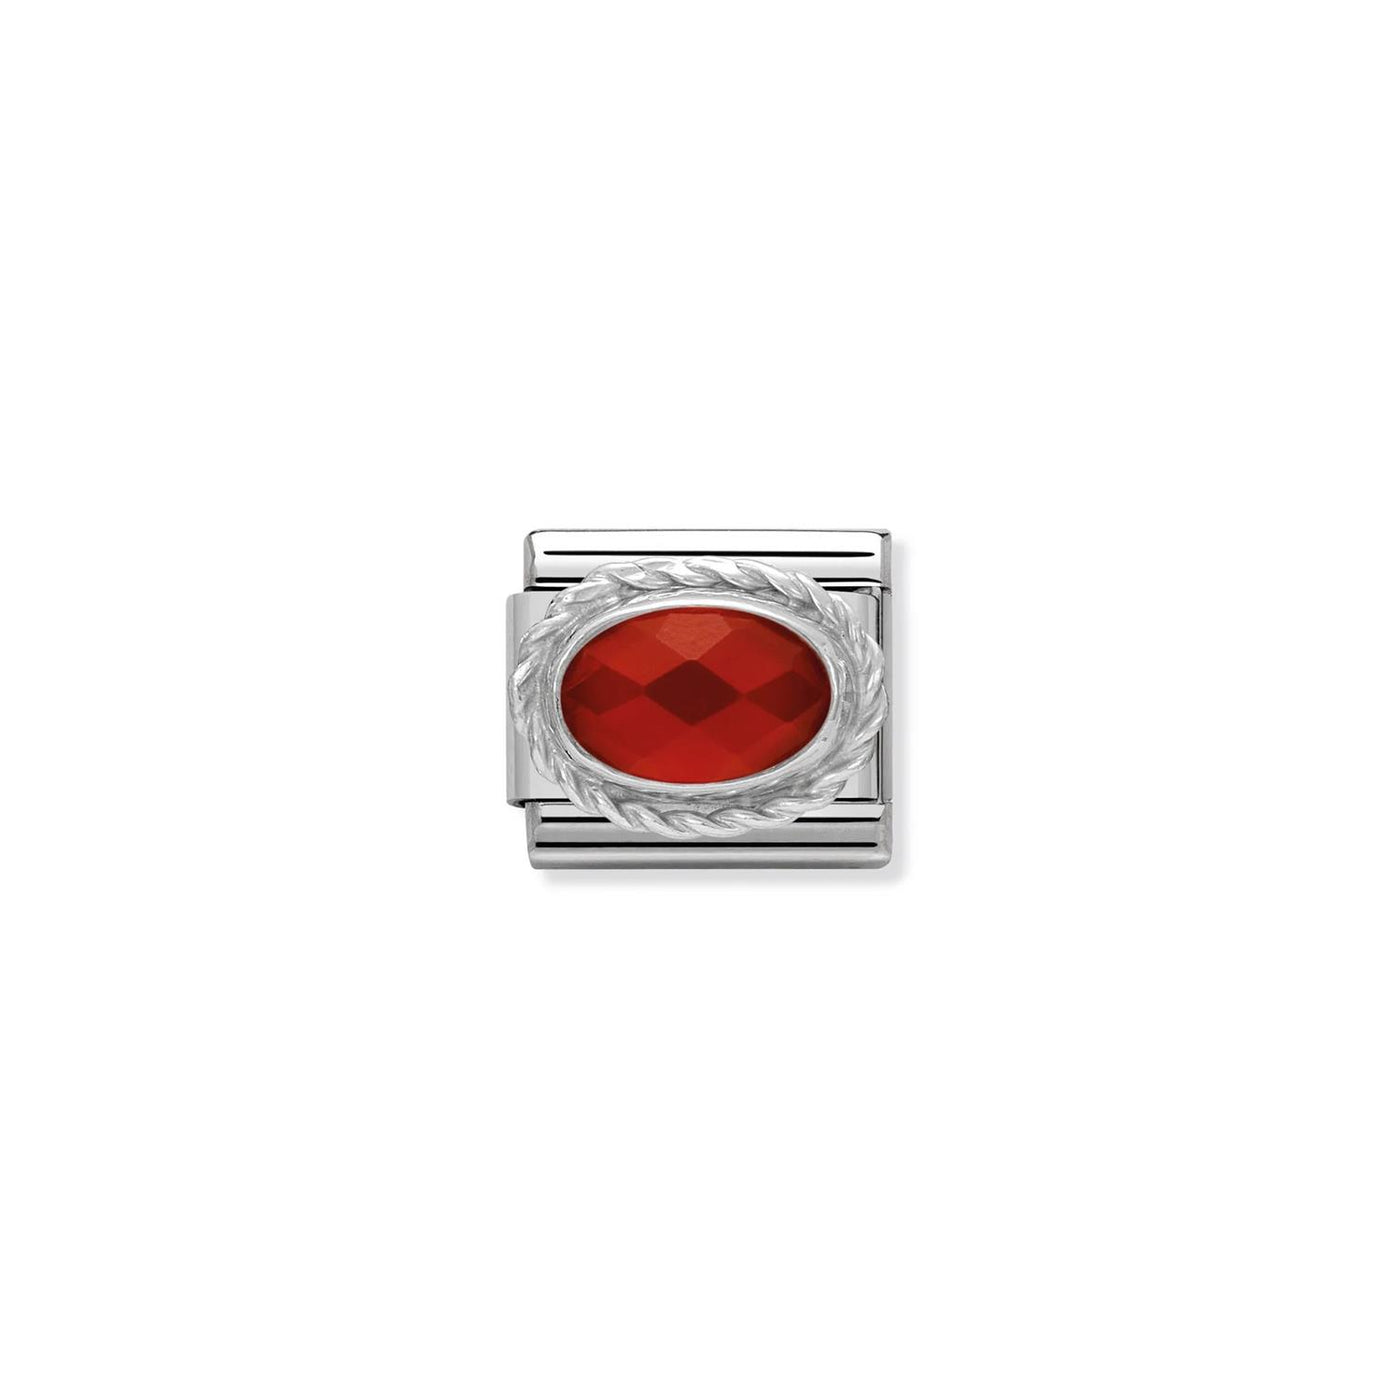 Hard stone with 925 sterling silver twisted setting Faceted Red Agate